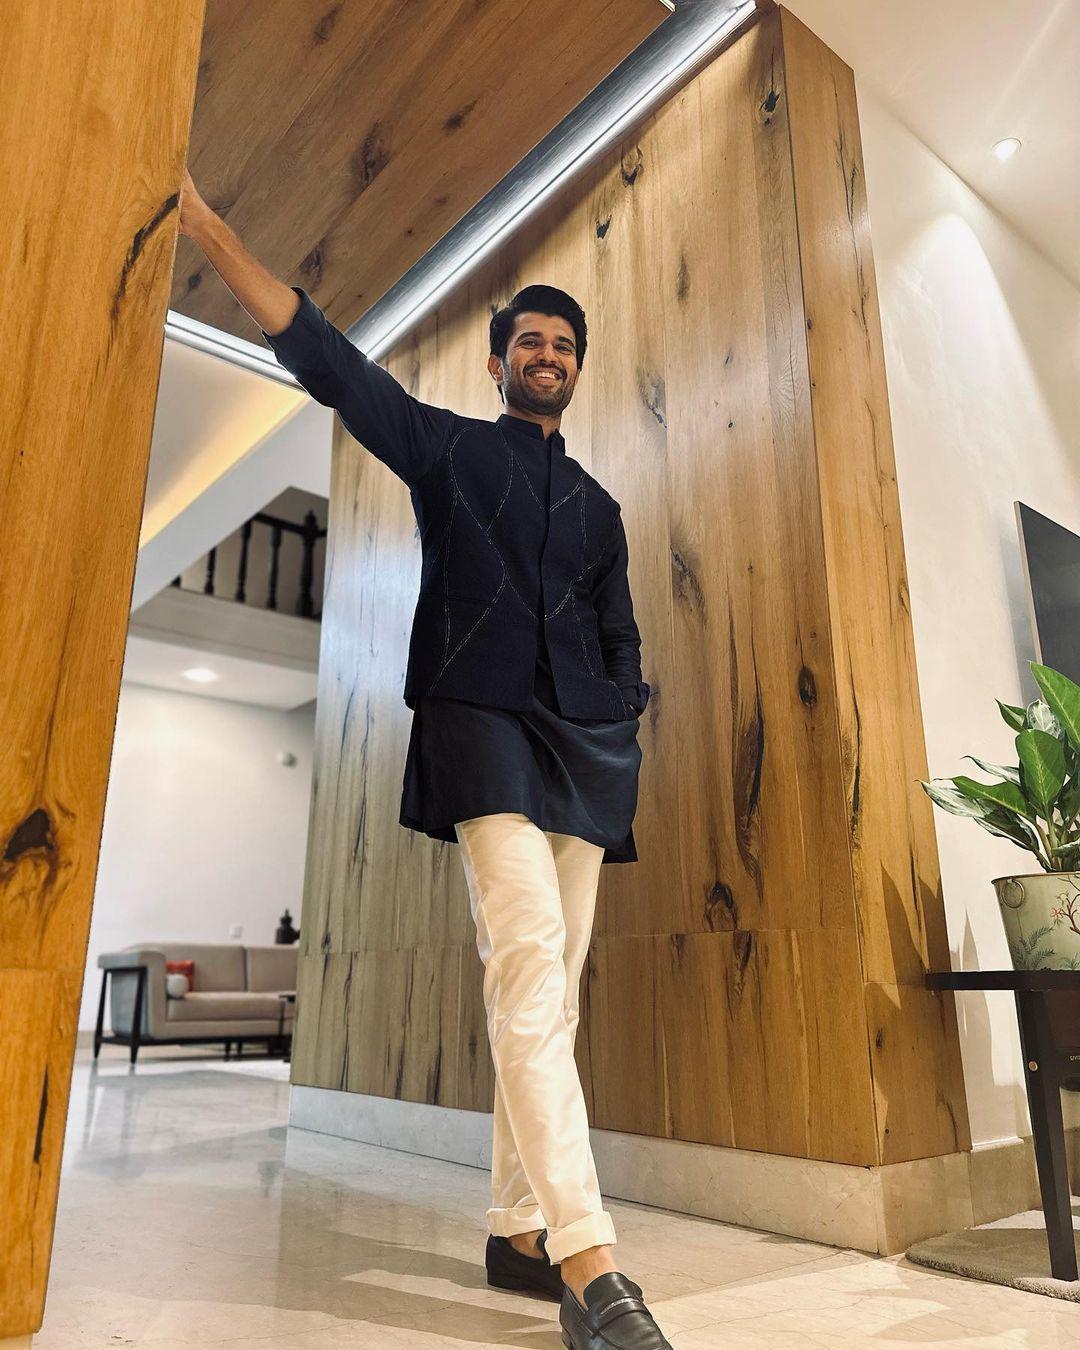 There is no attire that Vijay can carry and his appearance in Indian attire proves that he is the only address of fashion and the inspiration to everyone.